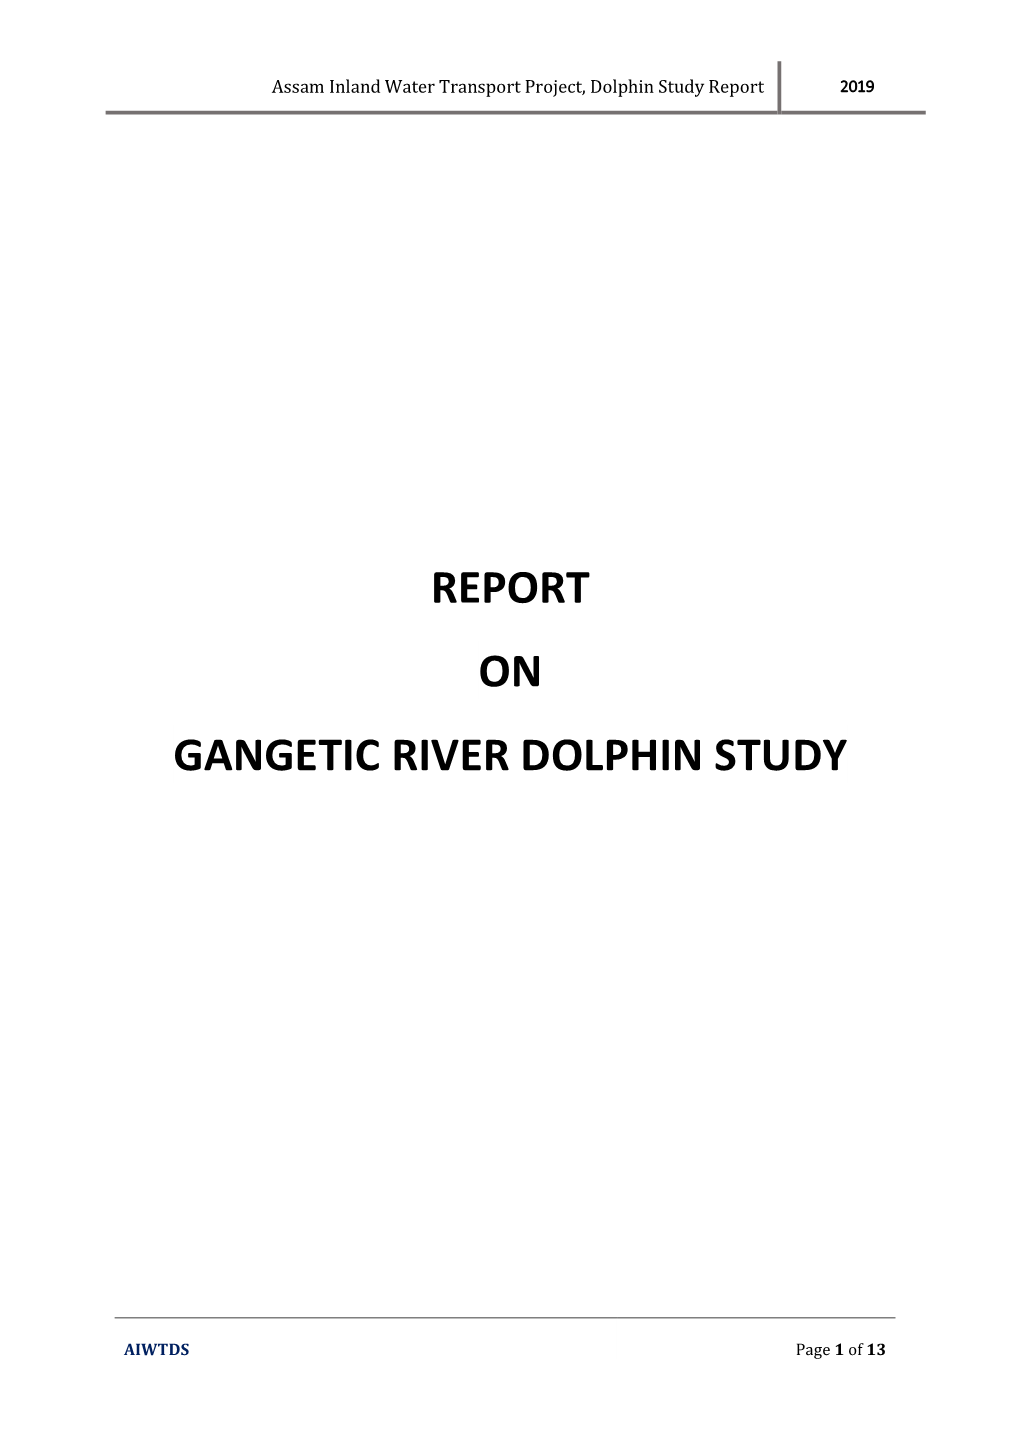 Report on Gangetic River Dolphin Study